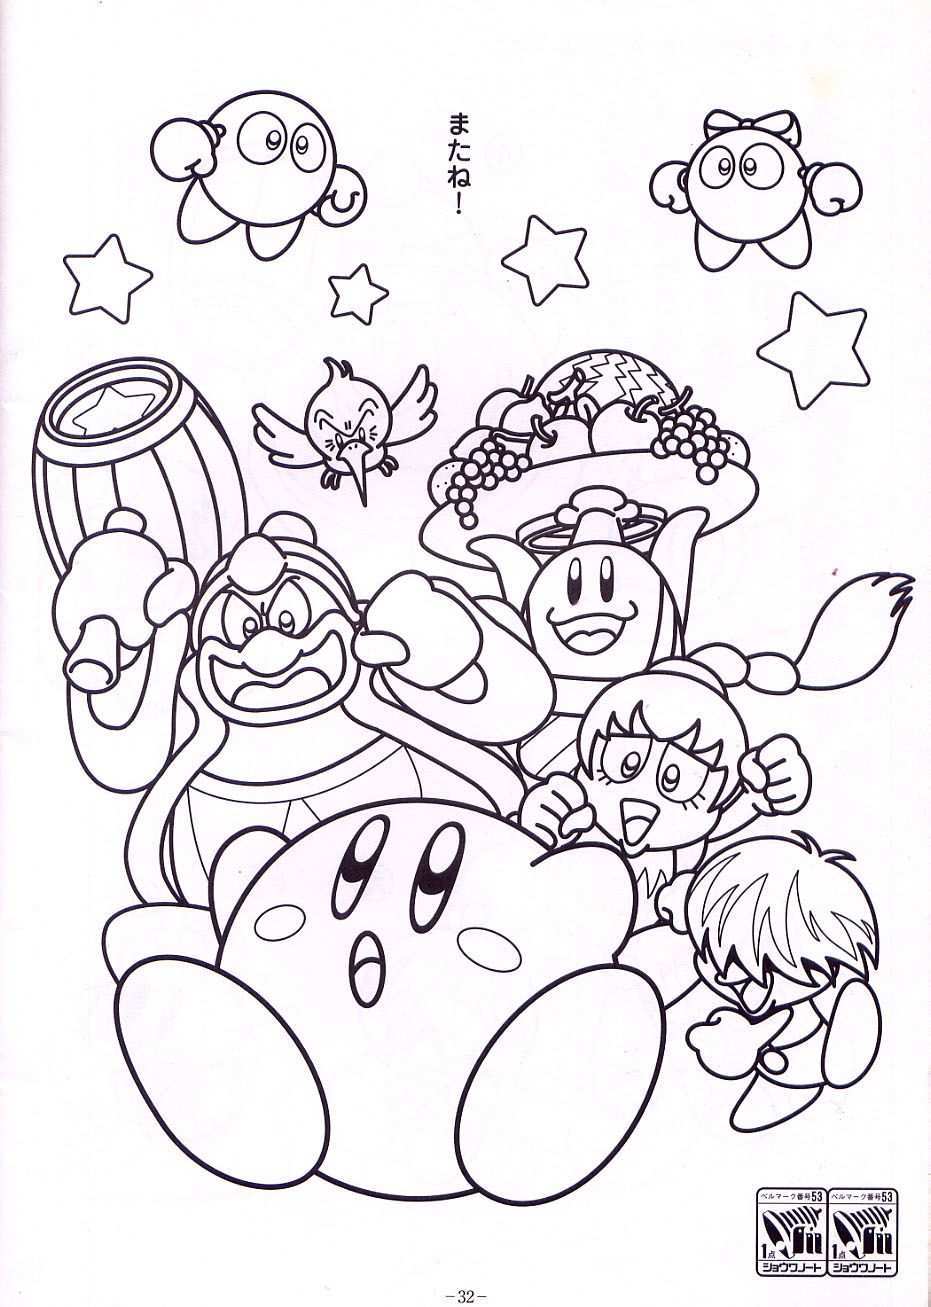 Kirby Coloring Page Monster Coloring Pages Super Mario Coloring Pages Mario Coloring Pages